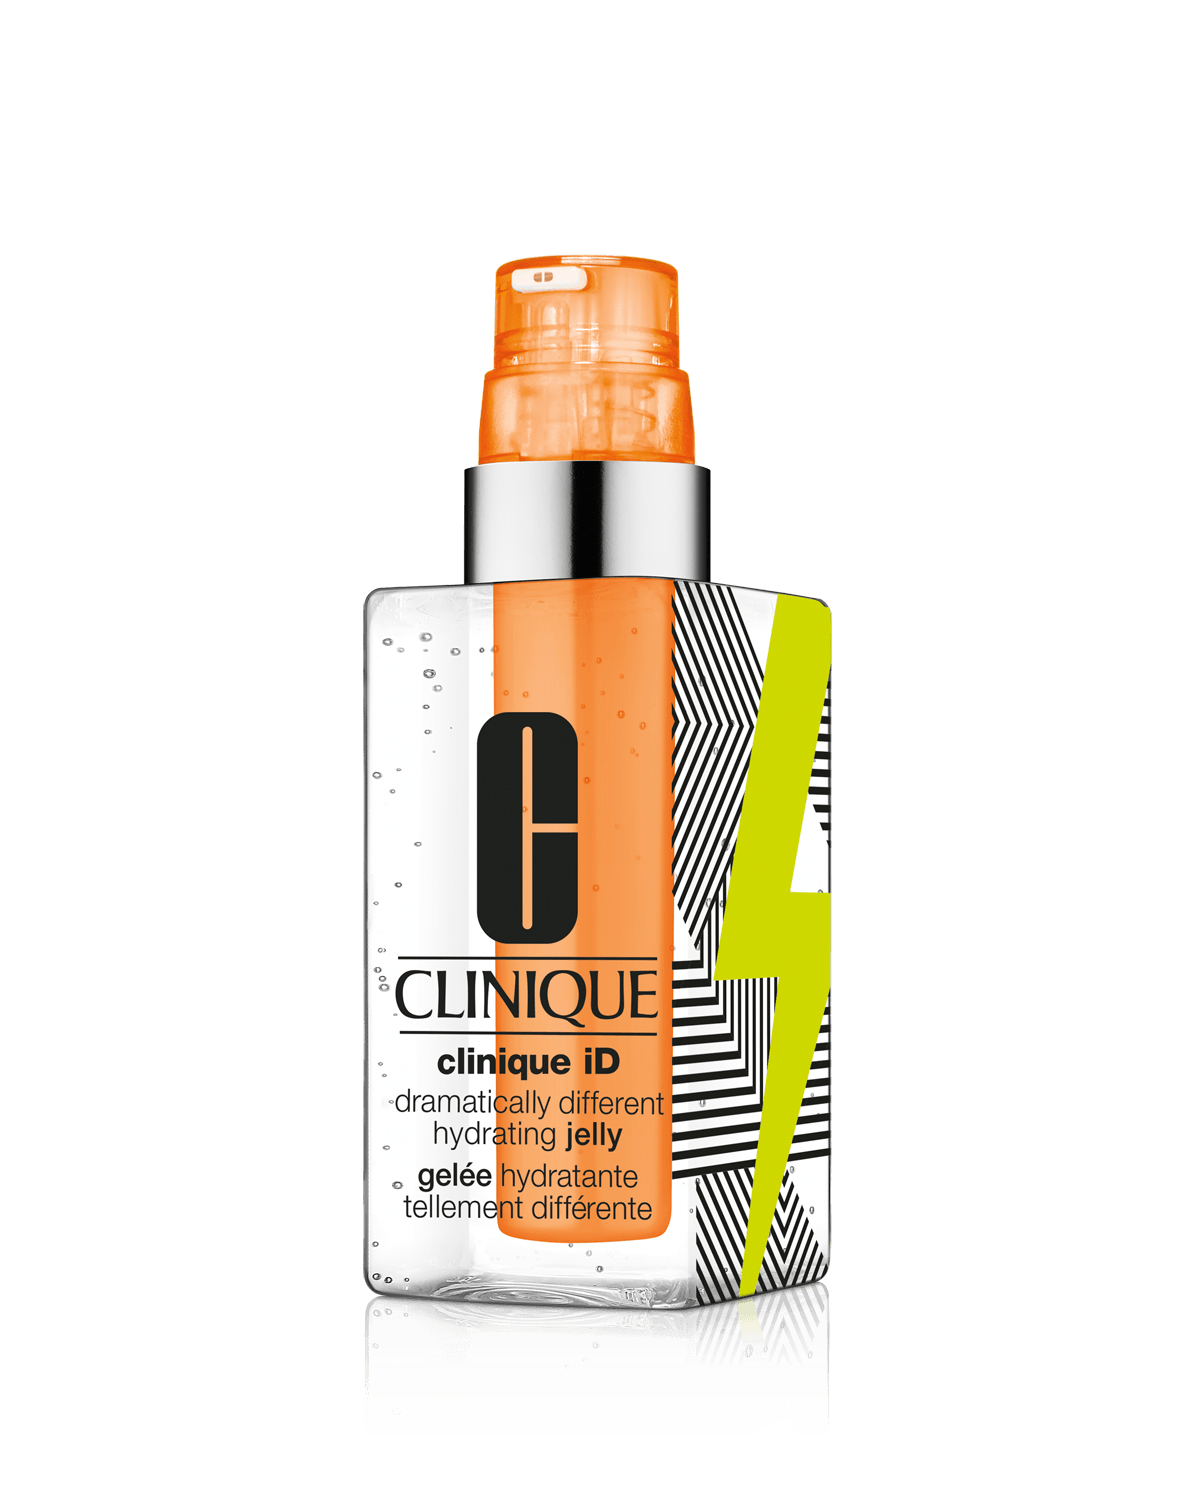 Limited Edition Print Clinique iD: Dramatically Different™ Hydrating Jelly & Active Cartridge Concentrate for Fatigue